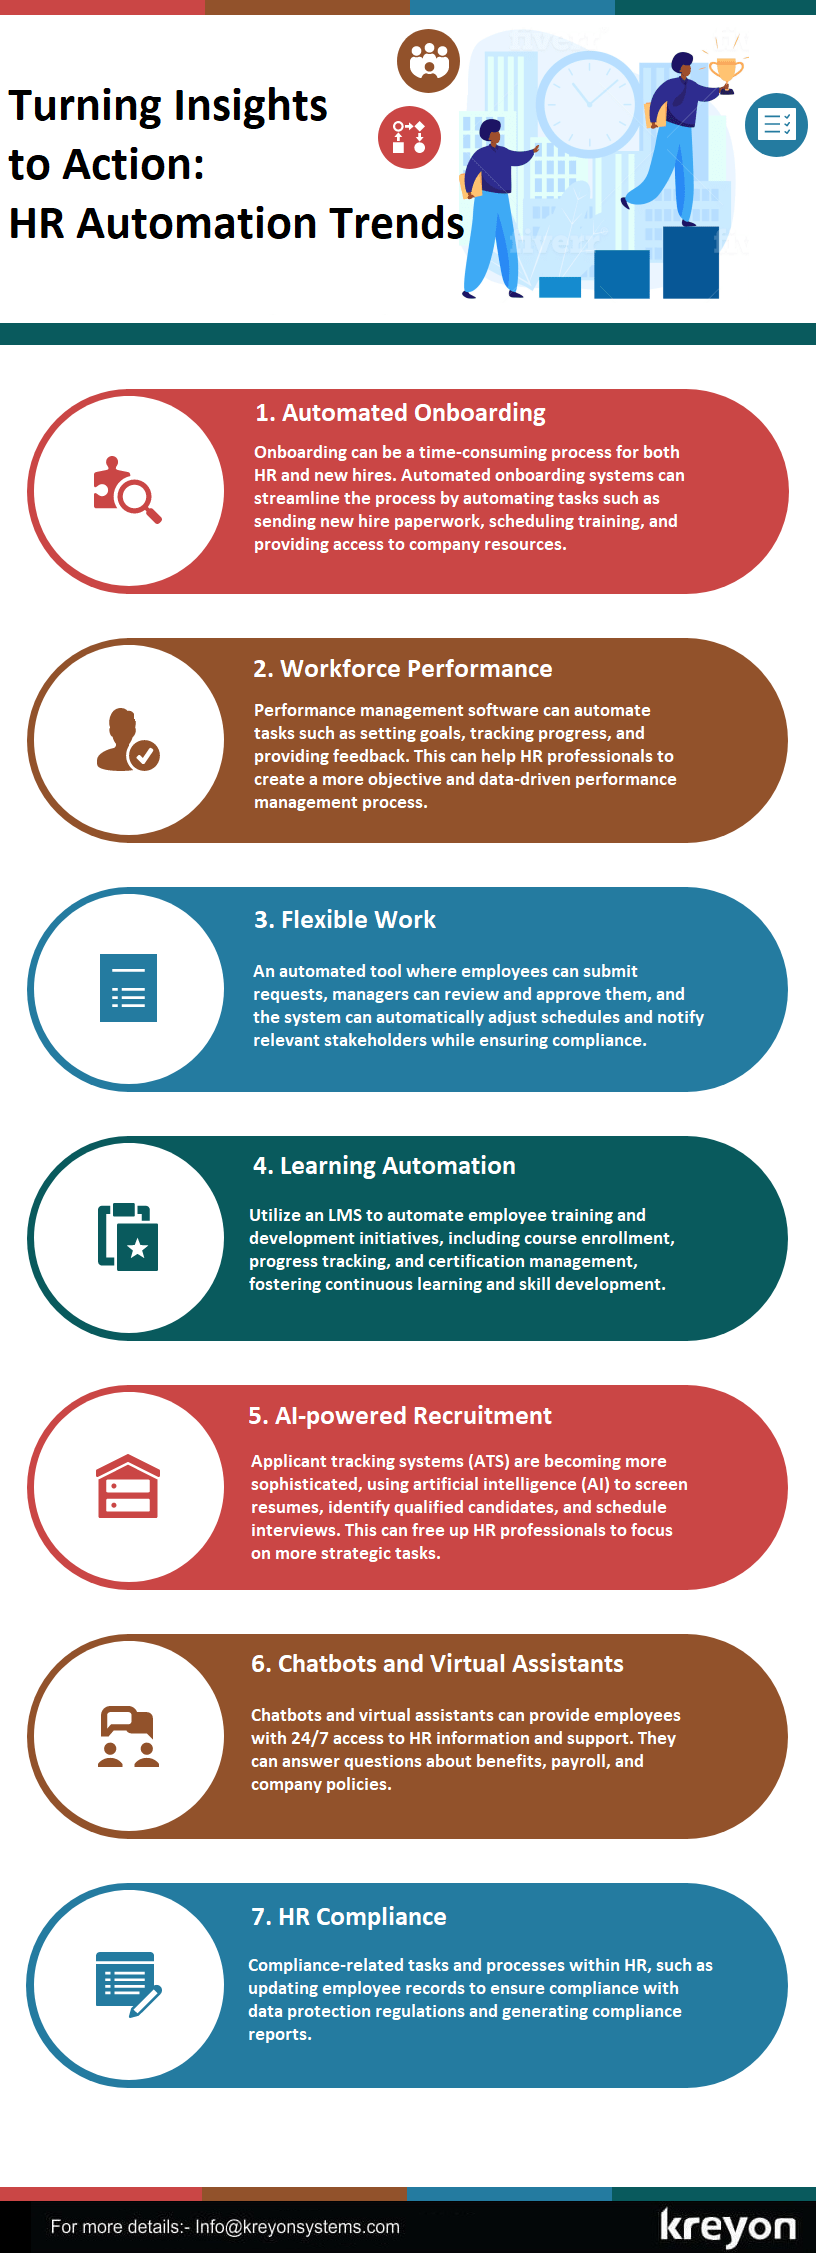 HR Automation Trends